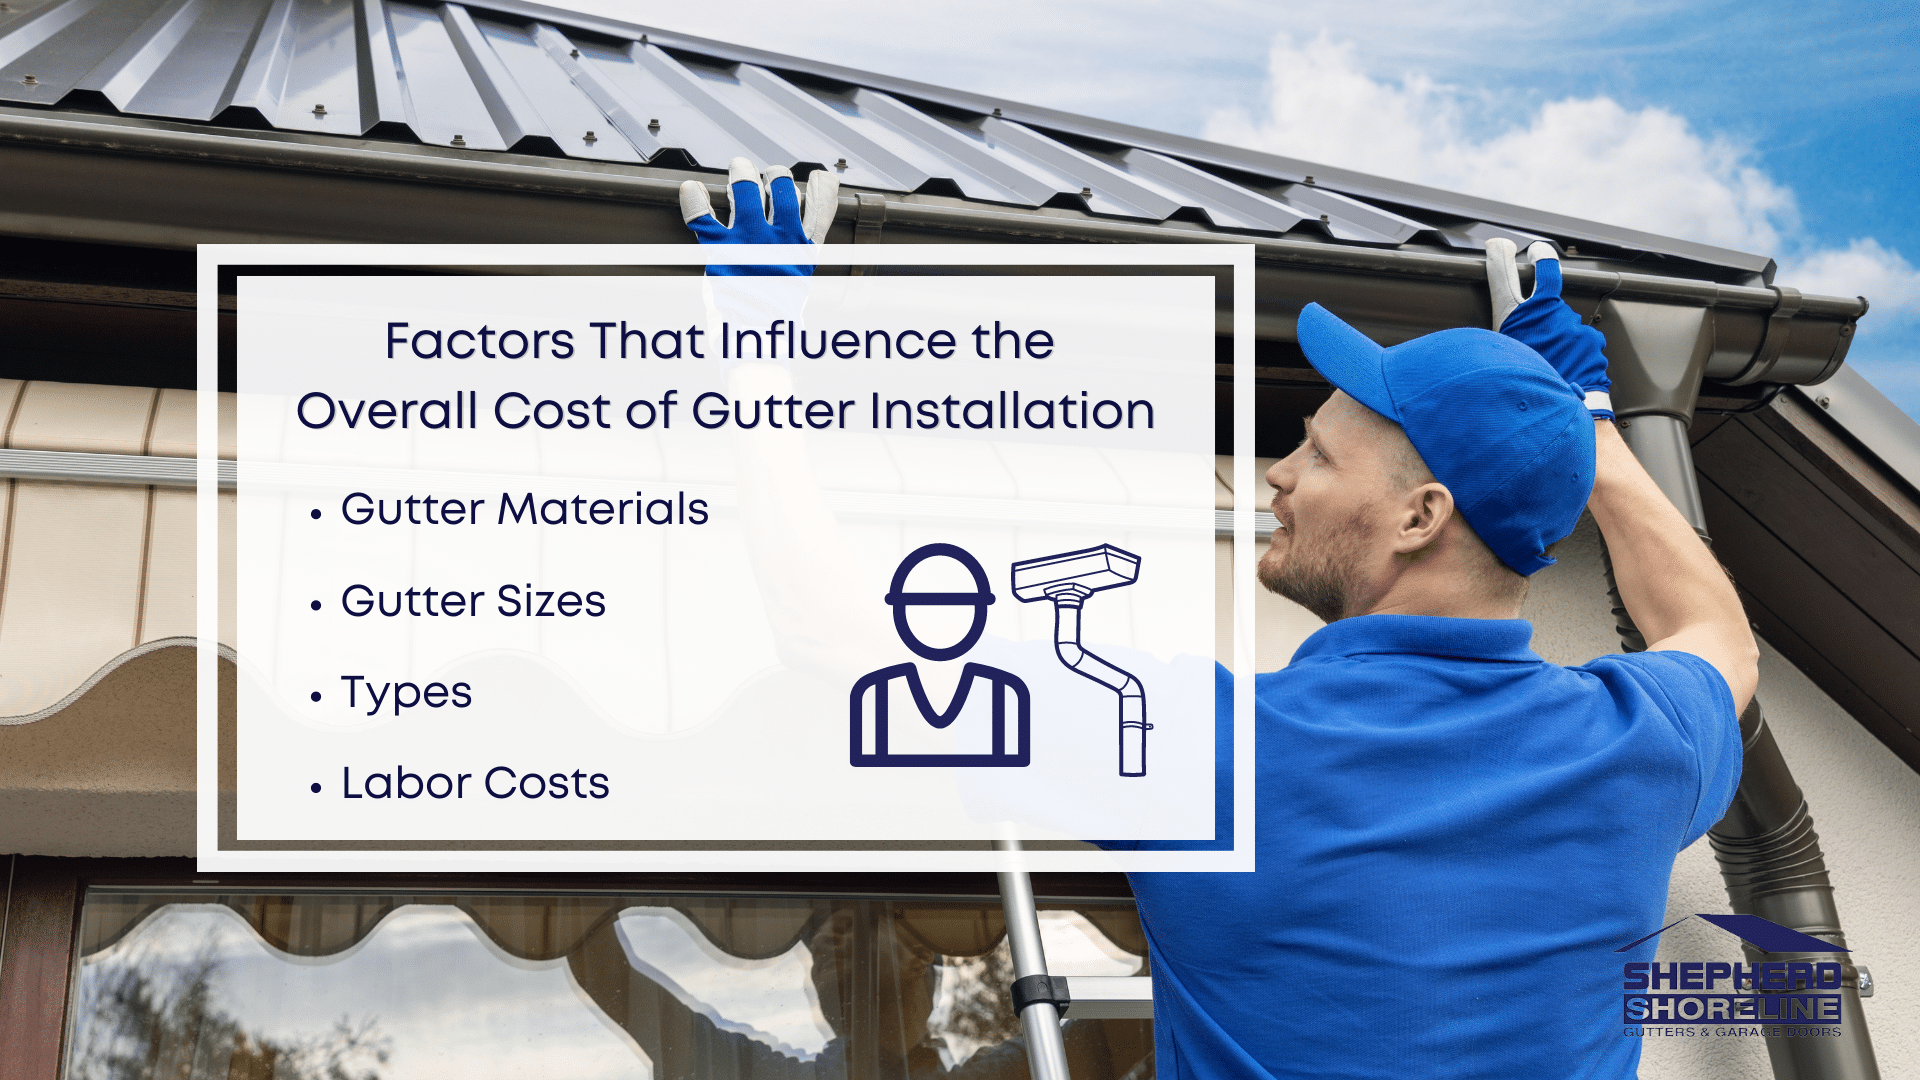 Infographic image of factors that influence the overall cost of gutter installation